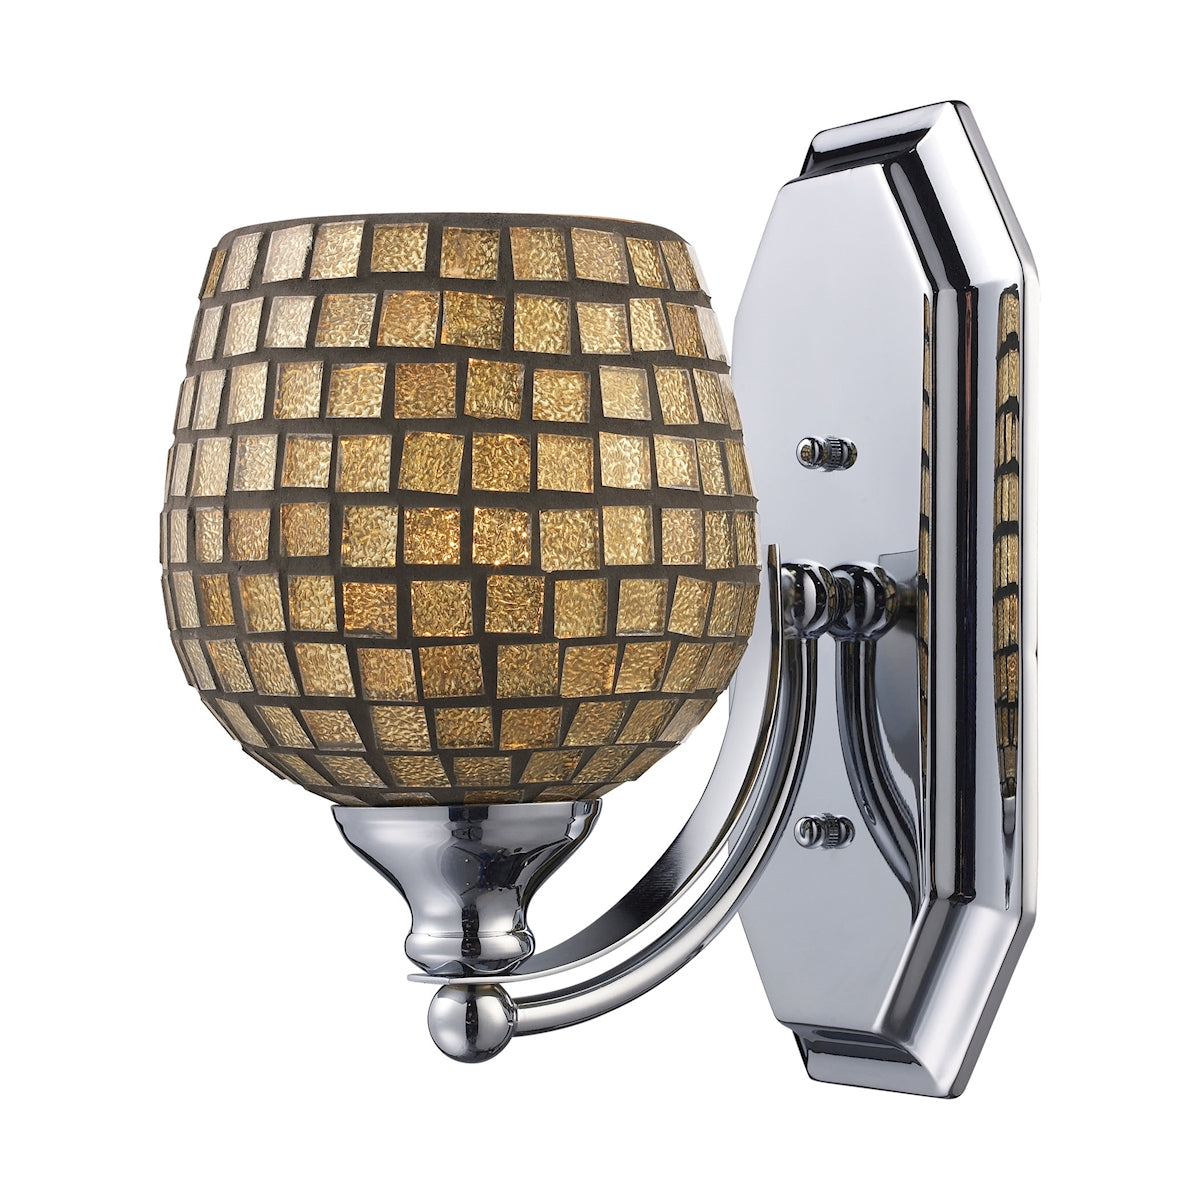 ELK Lighting 570-1N-GLD Mix-N-Match Vanity 1-Light Wall Lamp in Satin Nickel with Gold Leaf Glass